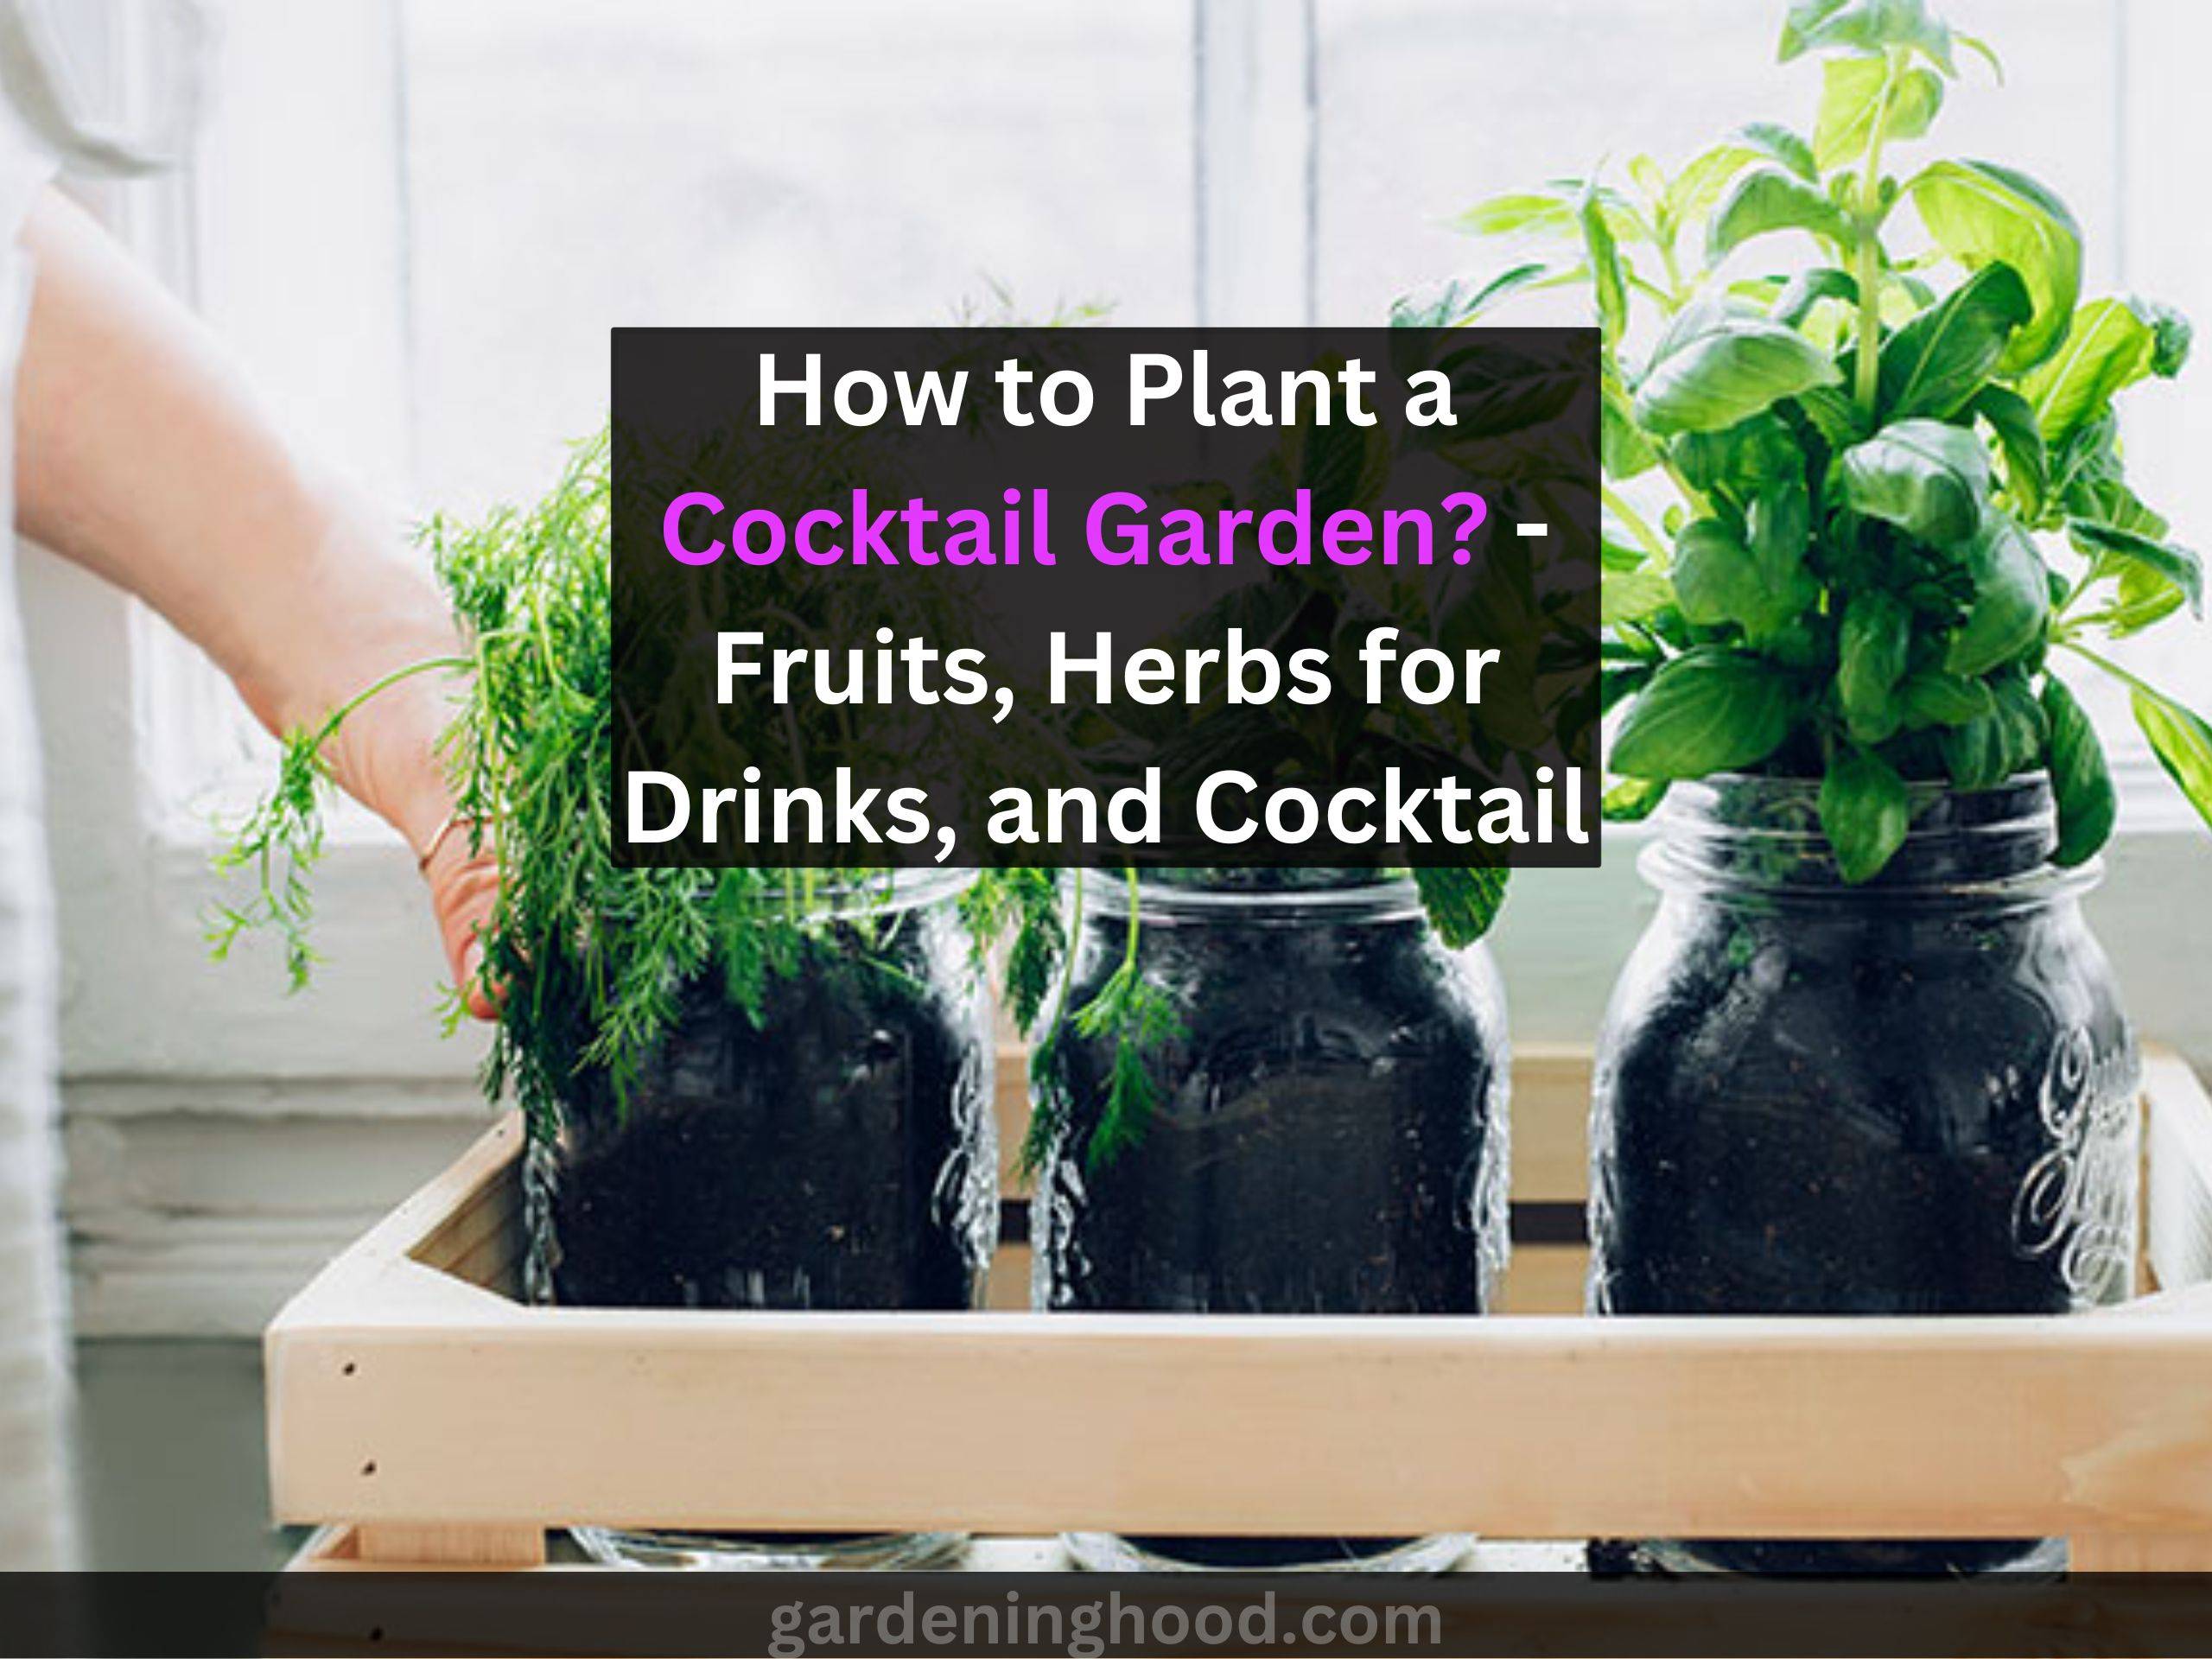 How to Plant a Cocktail Garden? - Fruits, Herbs for Drinks, and Cocktail